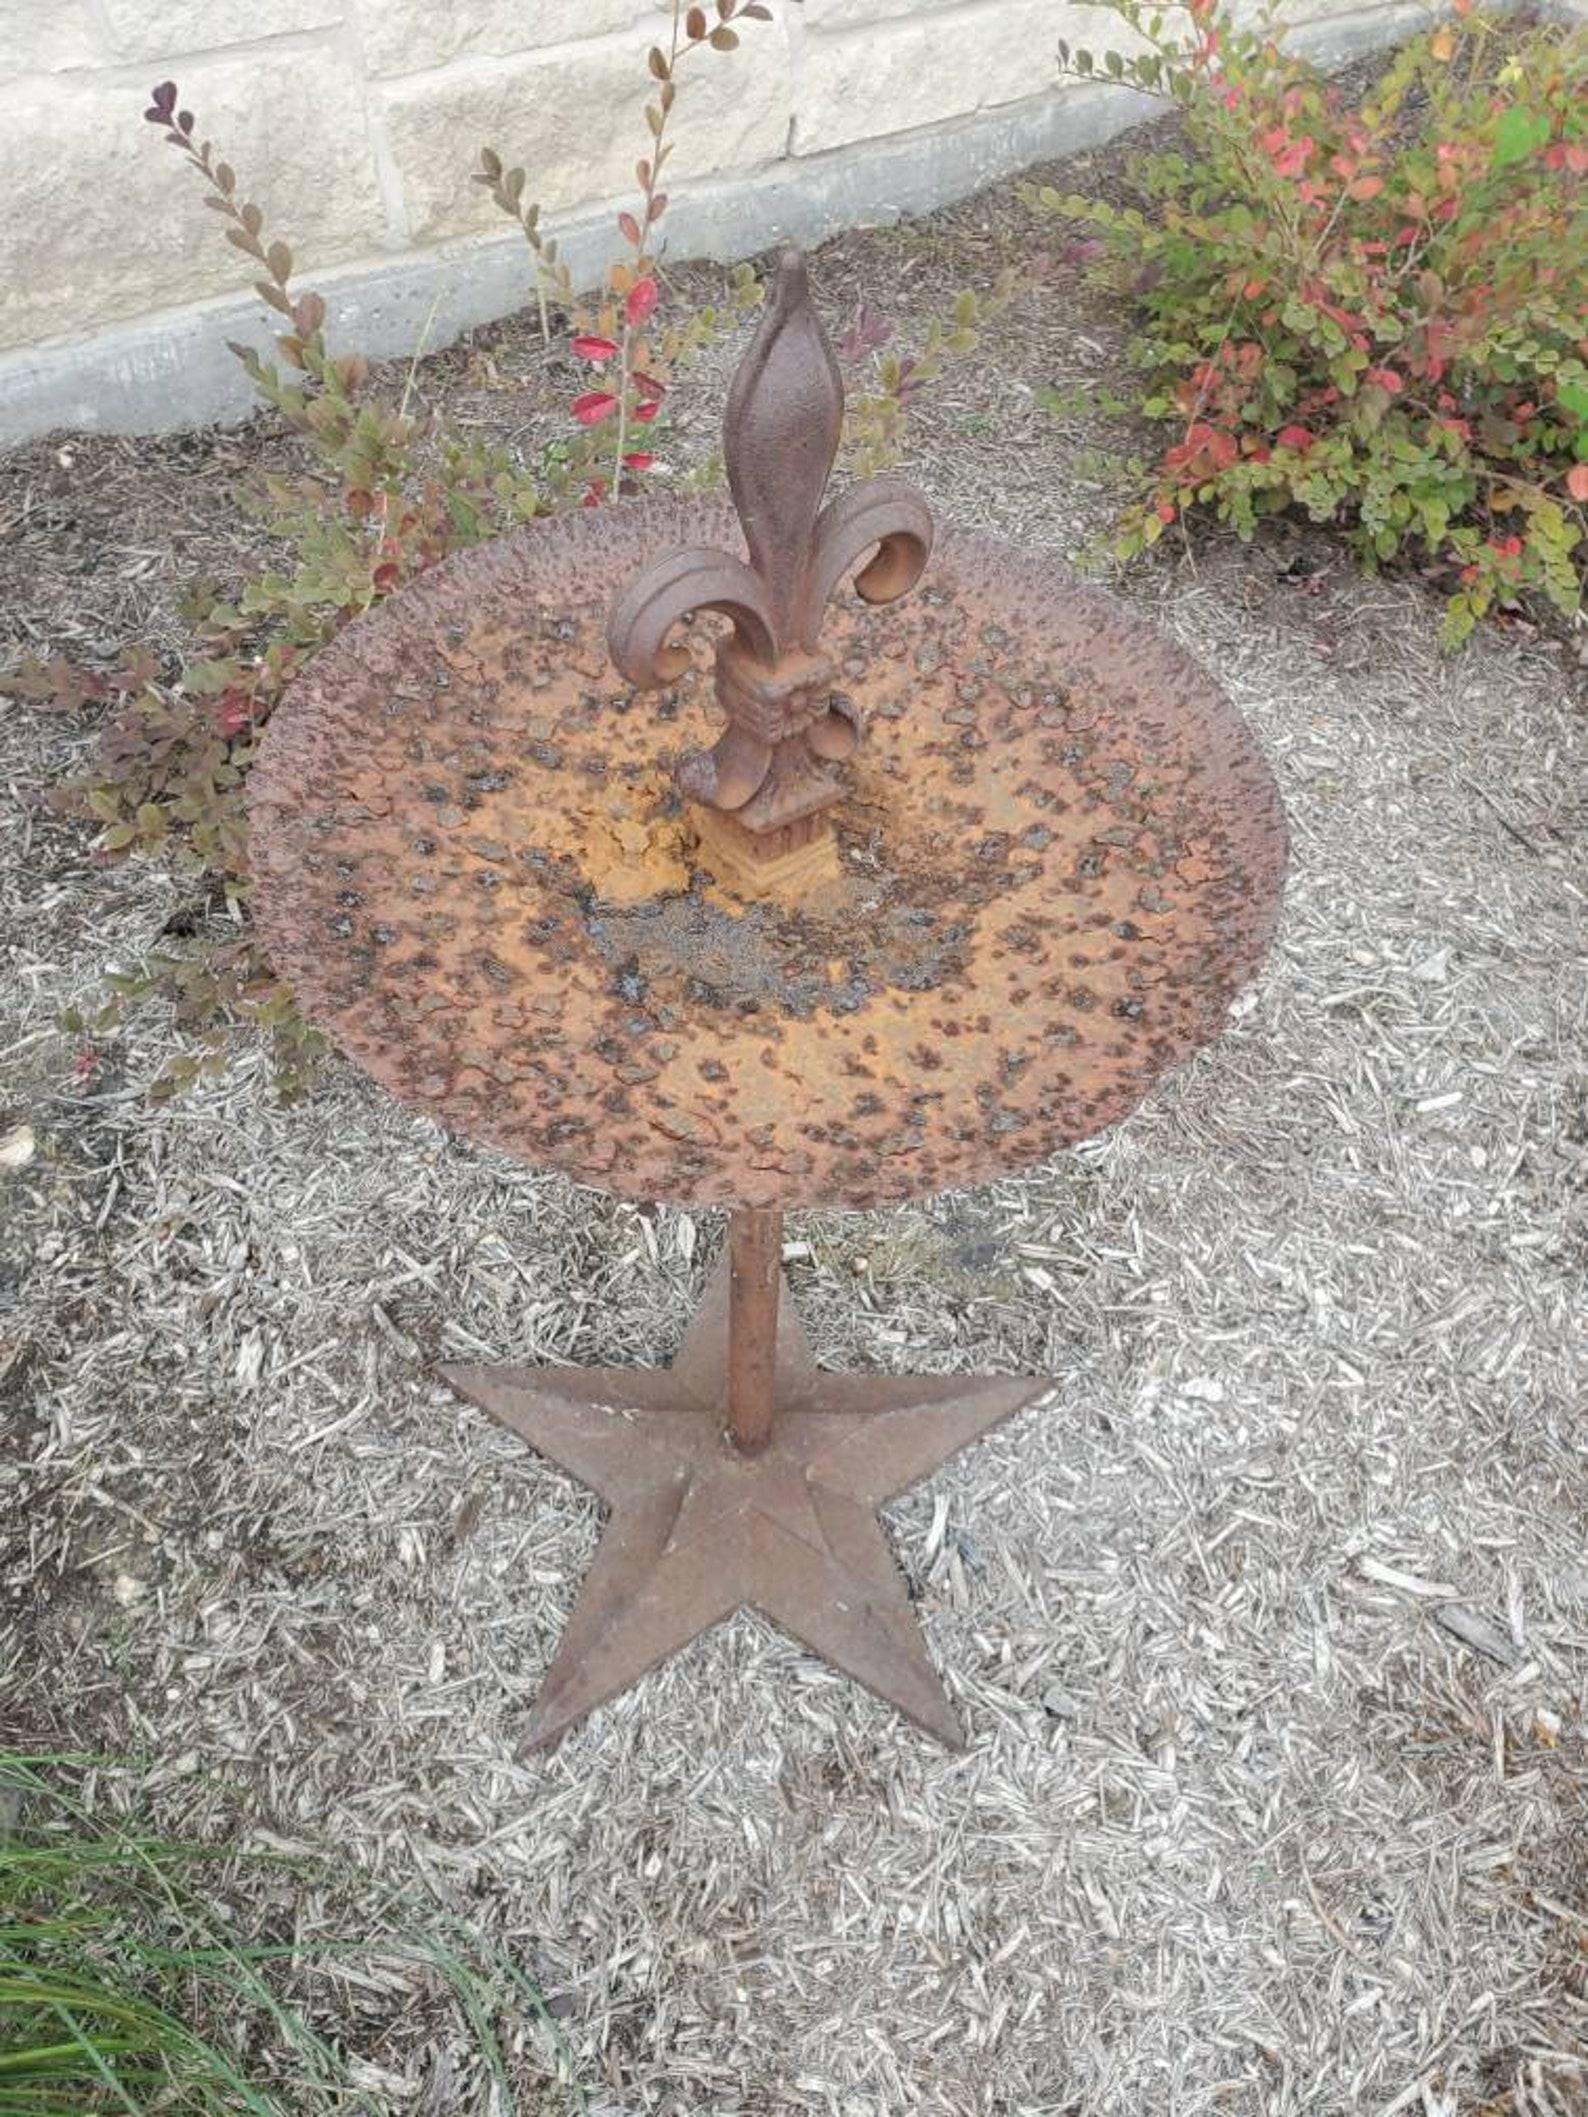 A one-of-a-kind antique architectural ironwork, handmade from salvaged building elements, having a rustic, heavily patinated circular disc/dish, with outstanding deep rust and burnt orange coloring and molten texture, surmounted by a regal